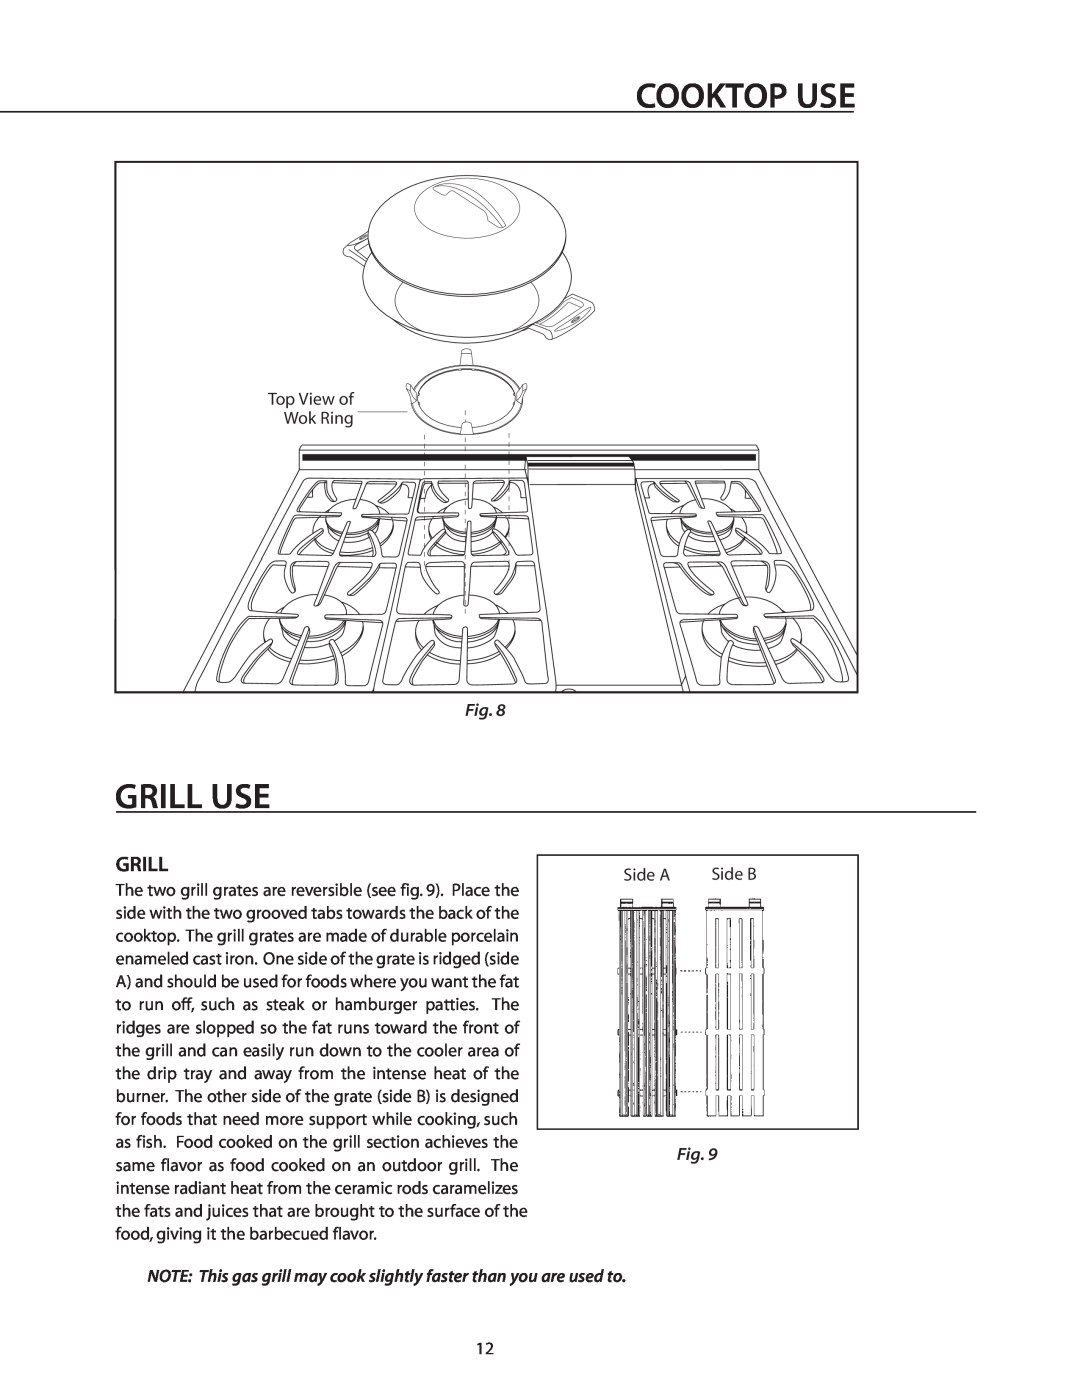 DCS RDS-305 manual Grill Use, Cooktop Use, NOTE This gas grill may cook slightly faster than you are used to 